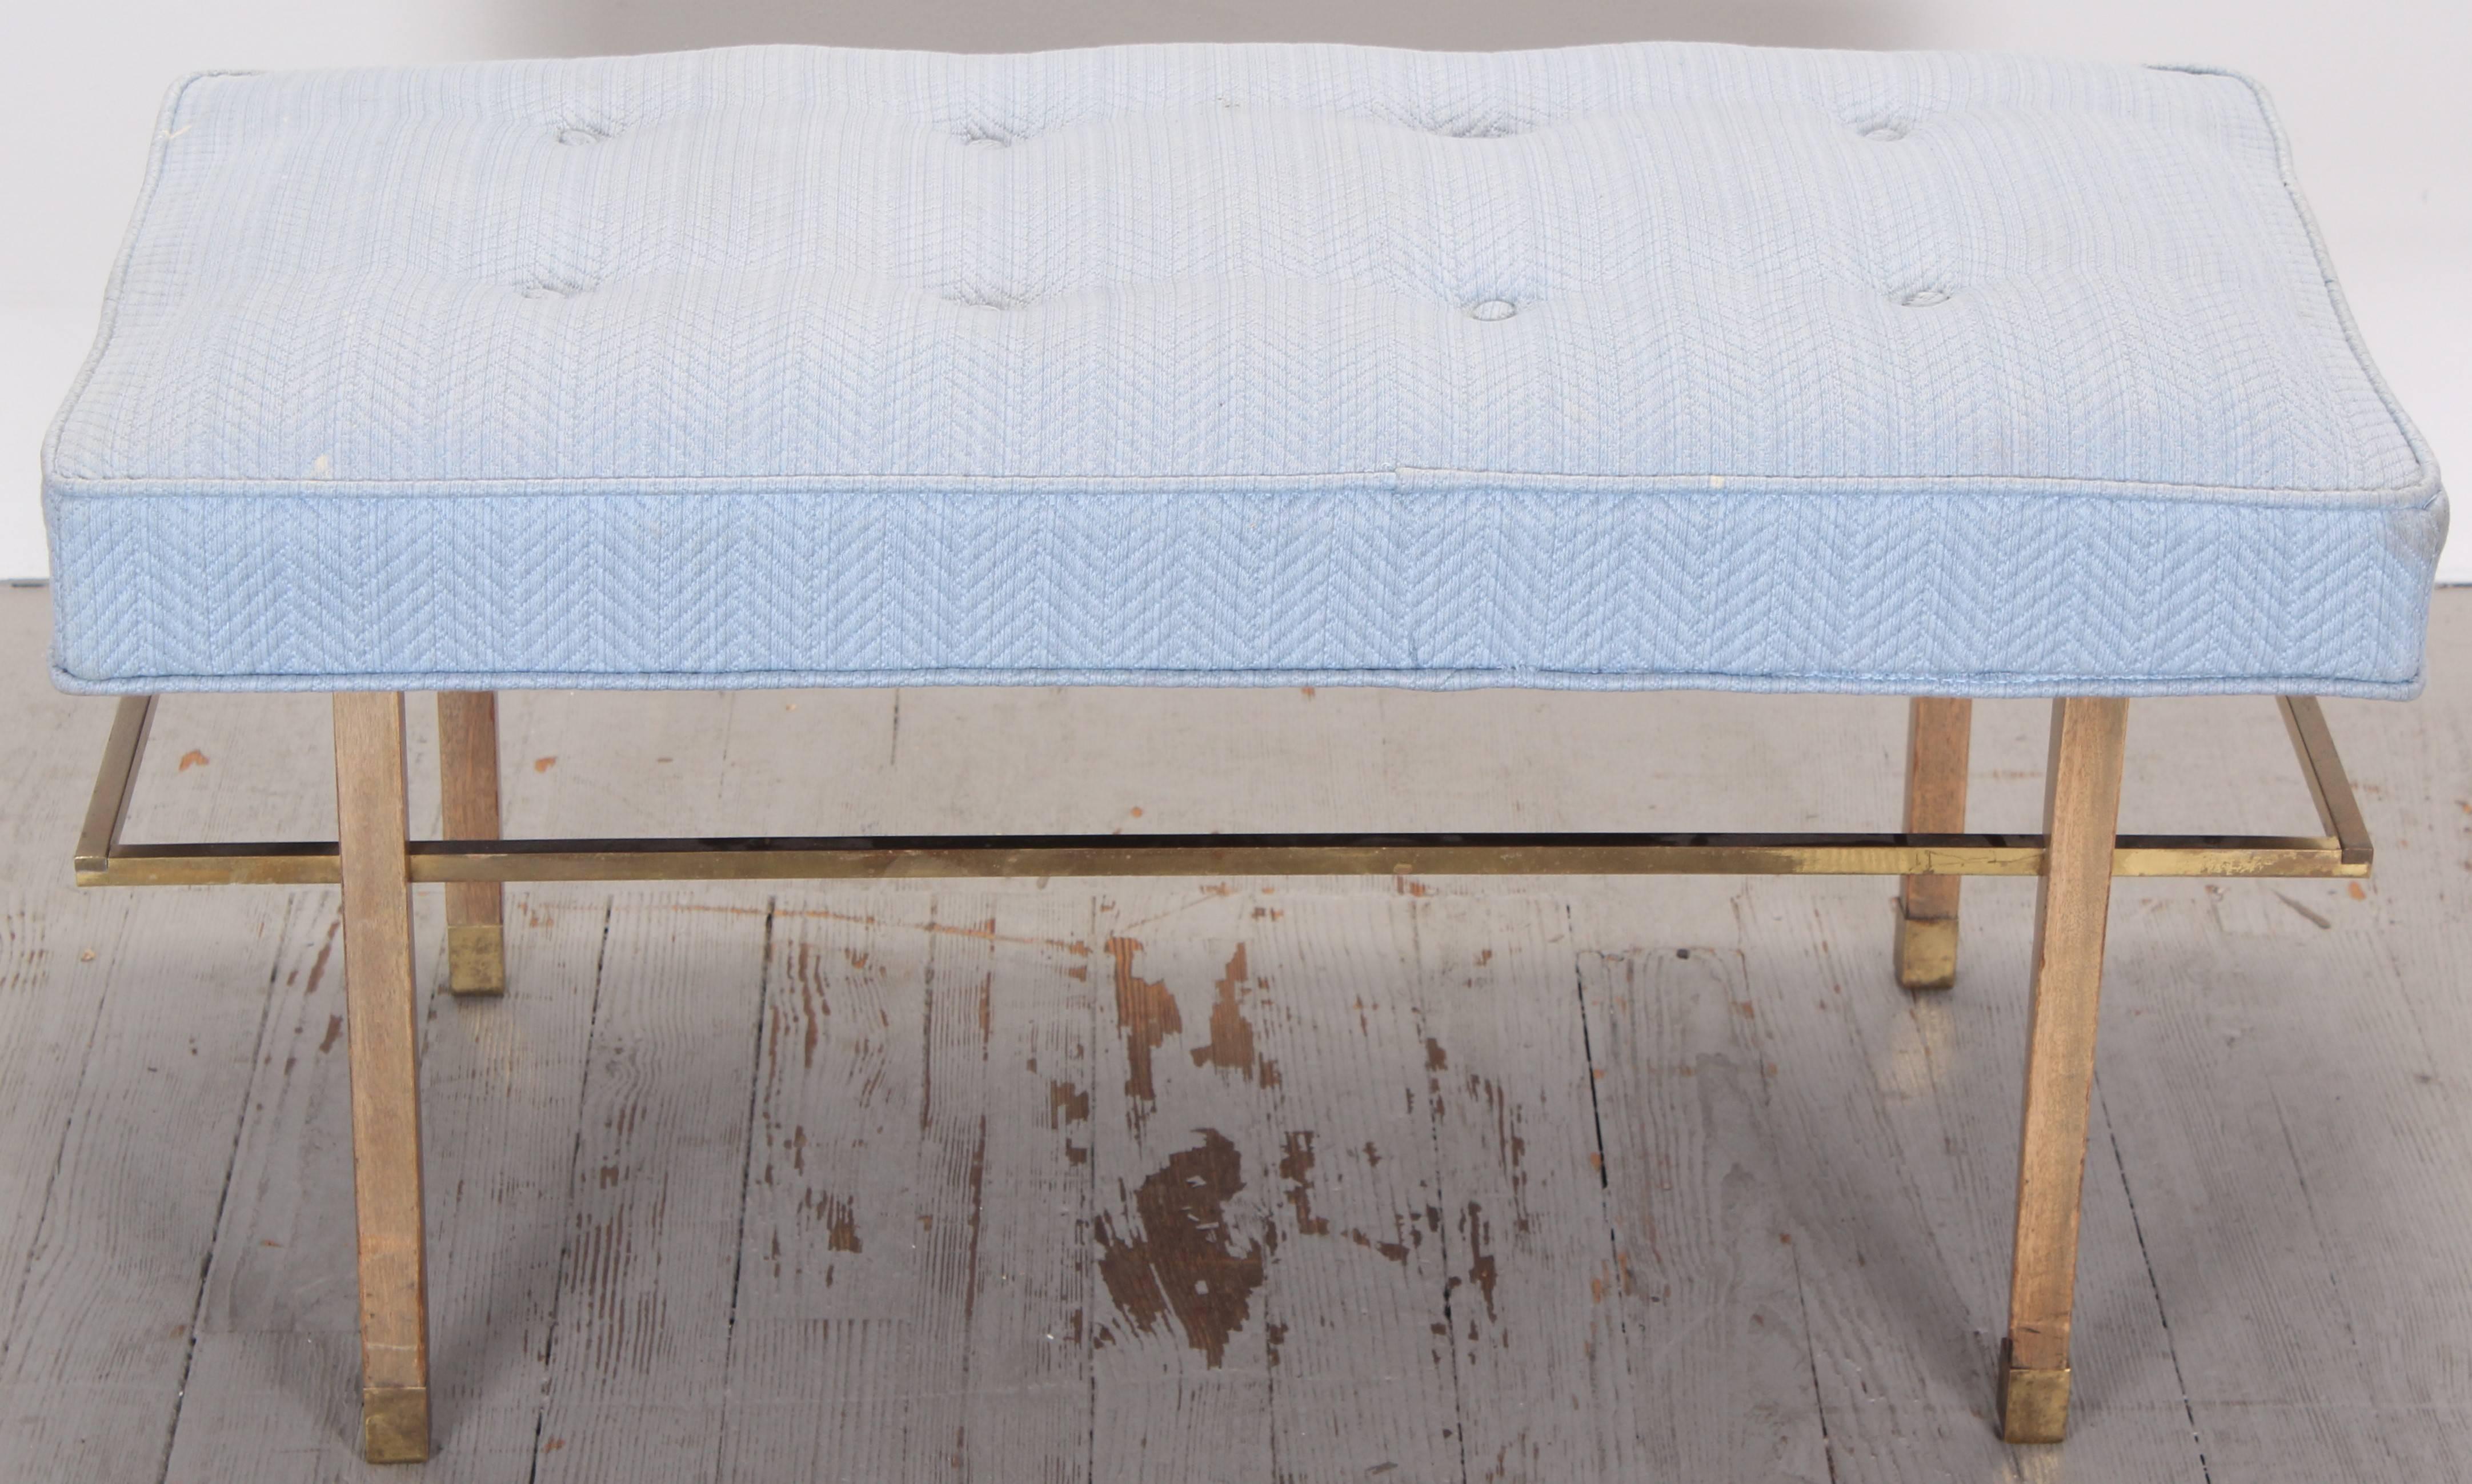 A rare Harvey Probber bench in as found condition. The finish appears to be original, upholstery looks like it was replace. There are several small spots on fabric as shown in images. A good candidate to be reconditioned.